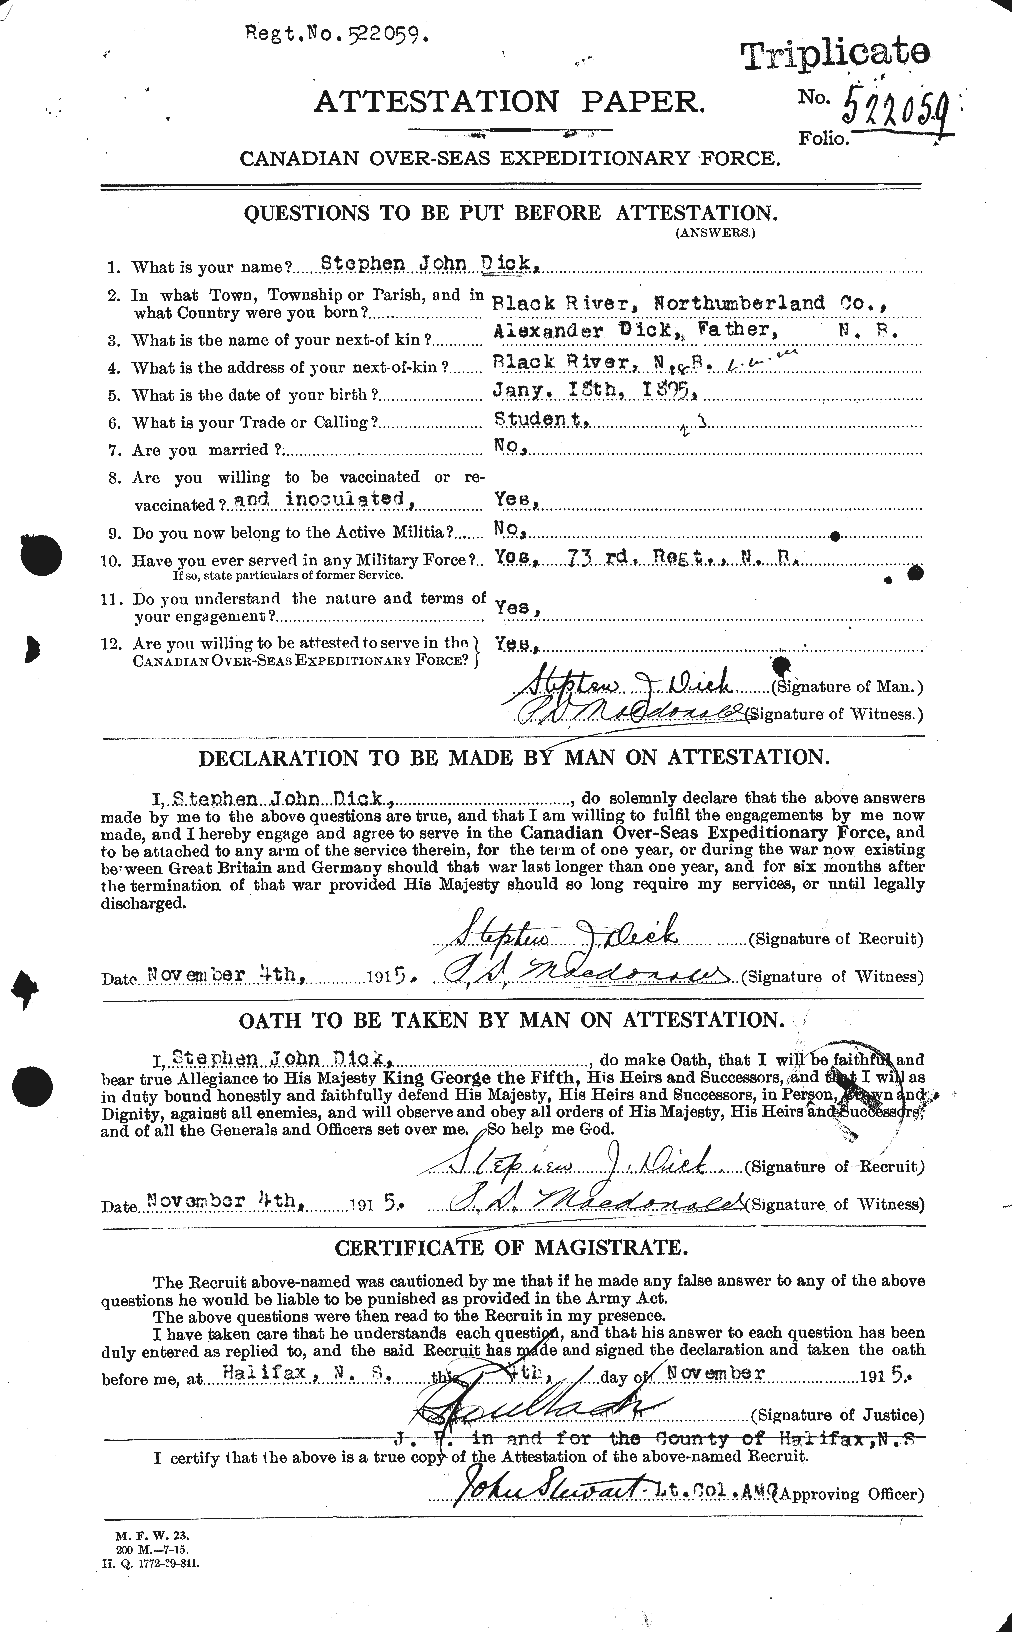 Personnel Records of the First World War - CEF 290560a